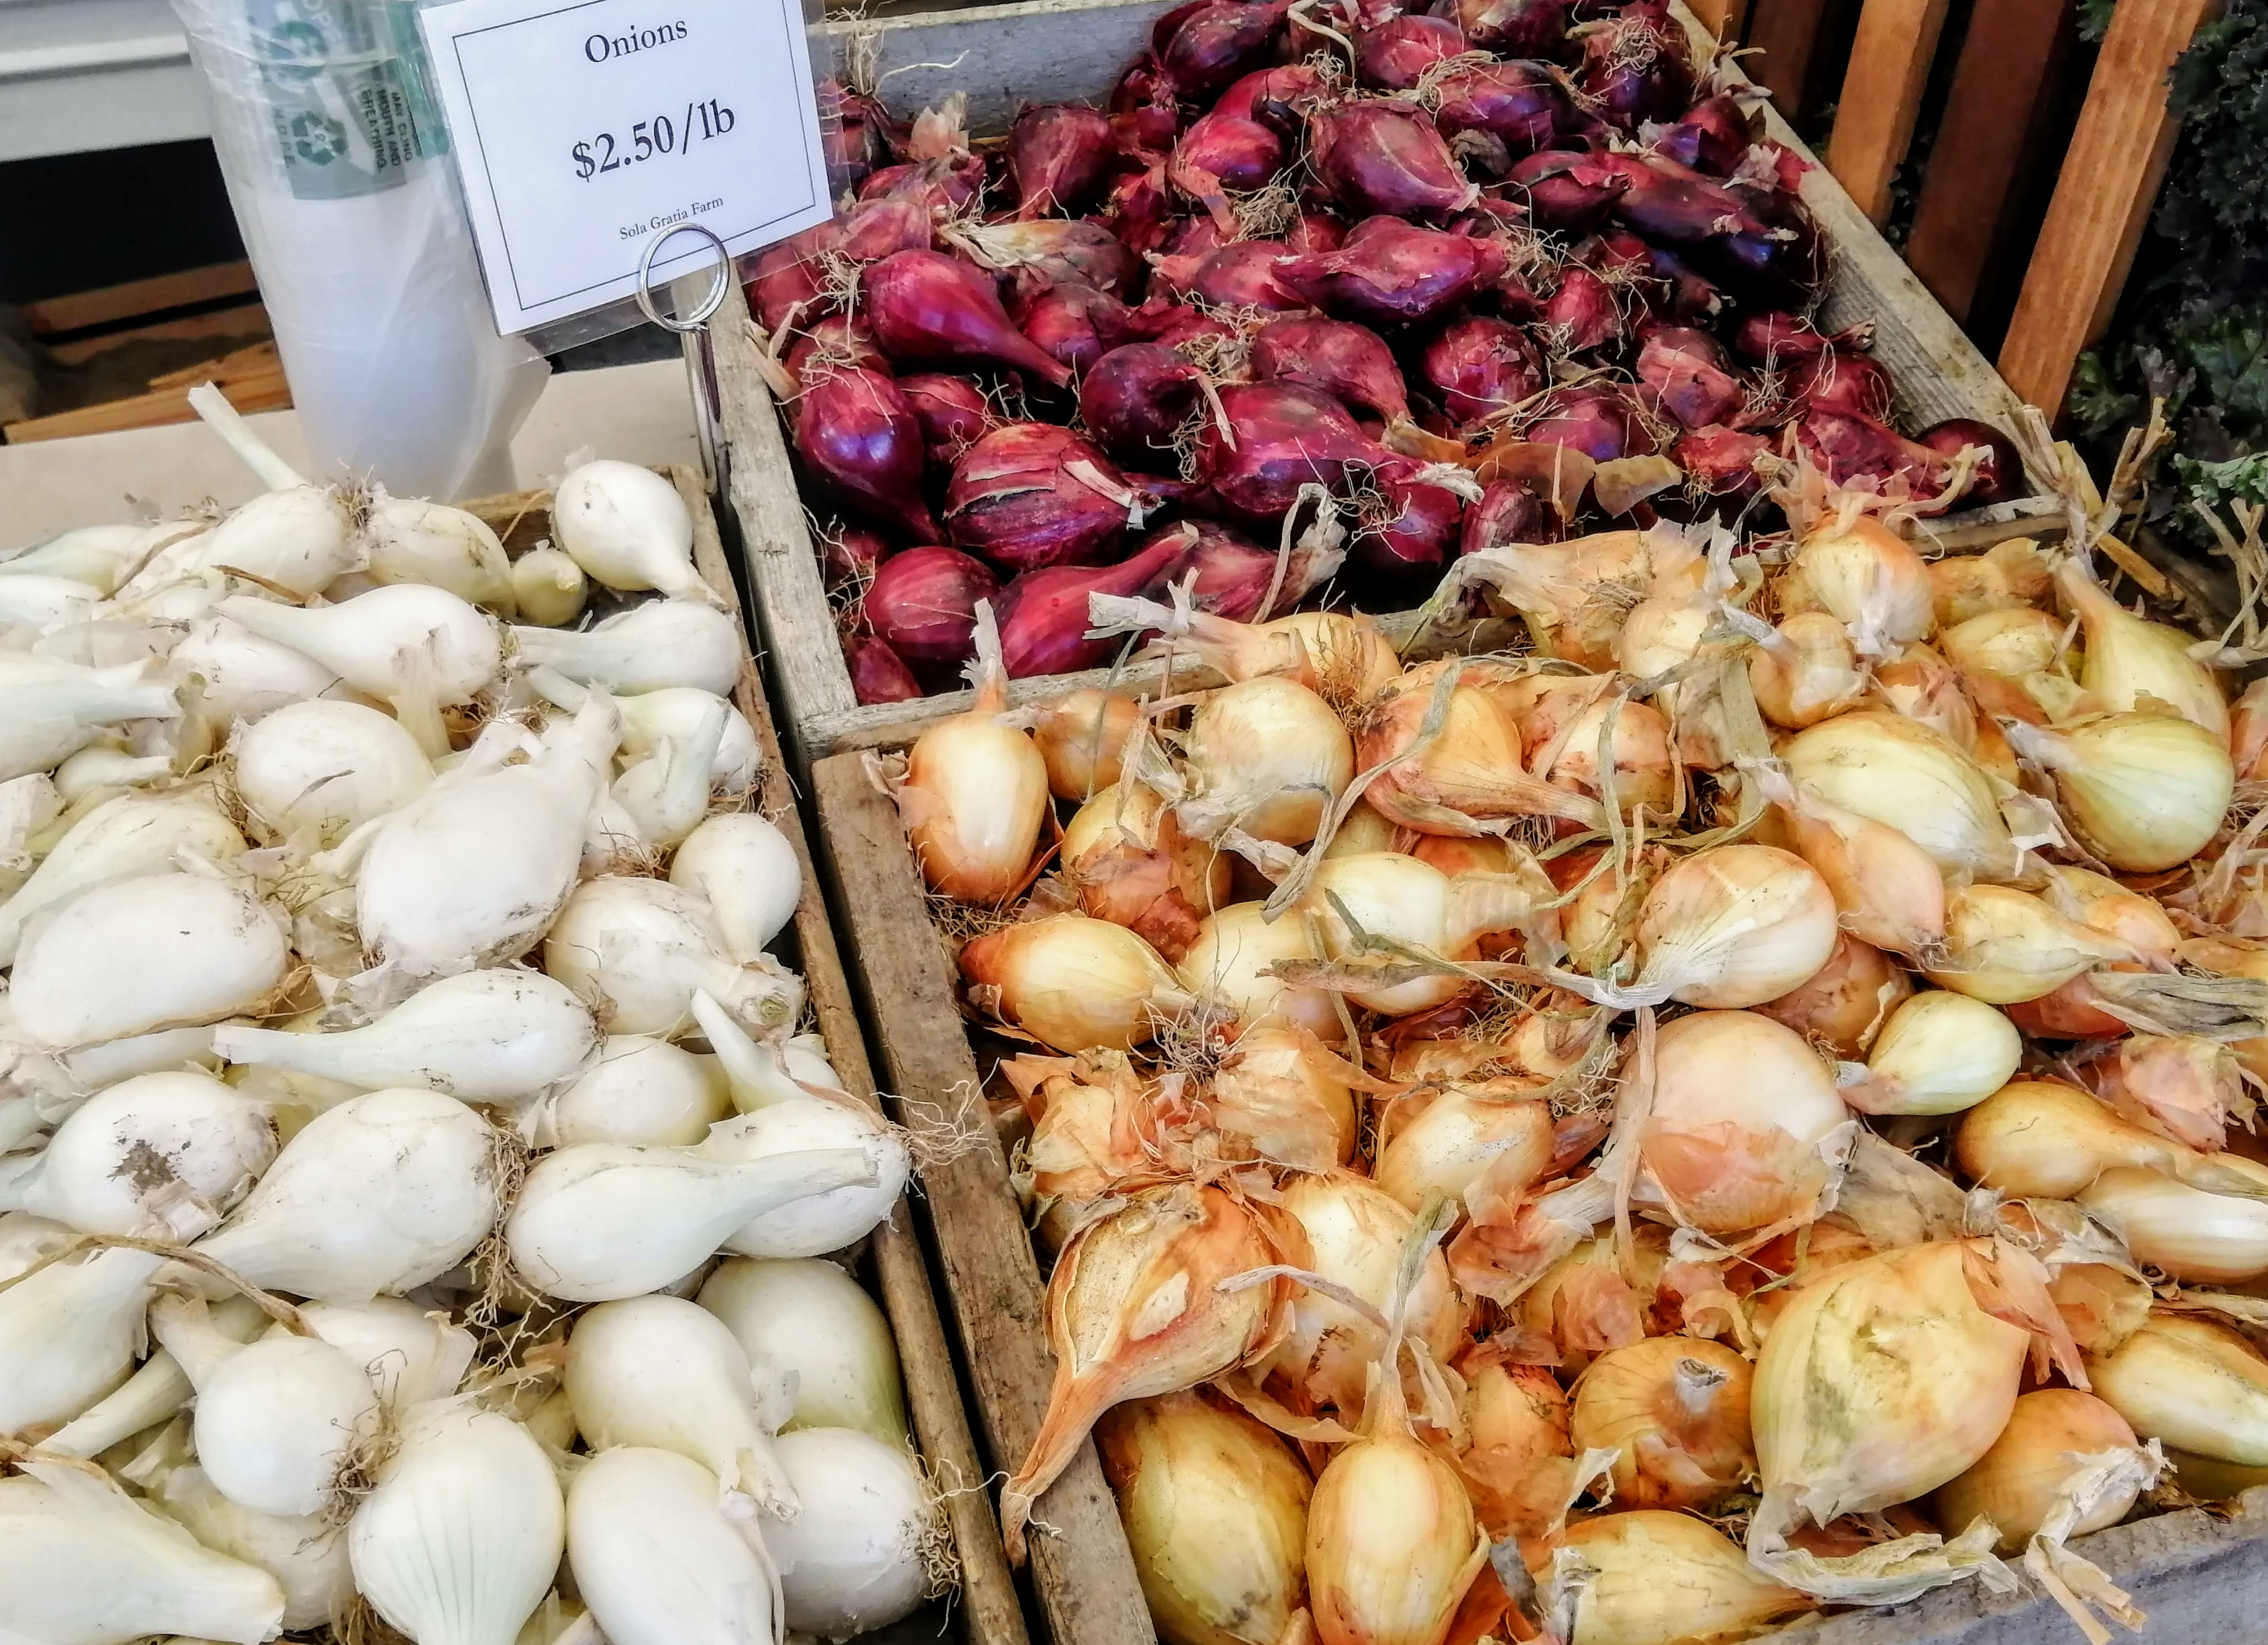 A colorful display of multi-colored onions. Photo by Paul Young.